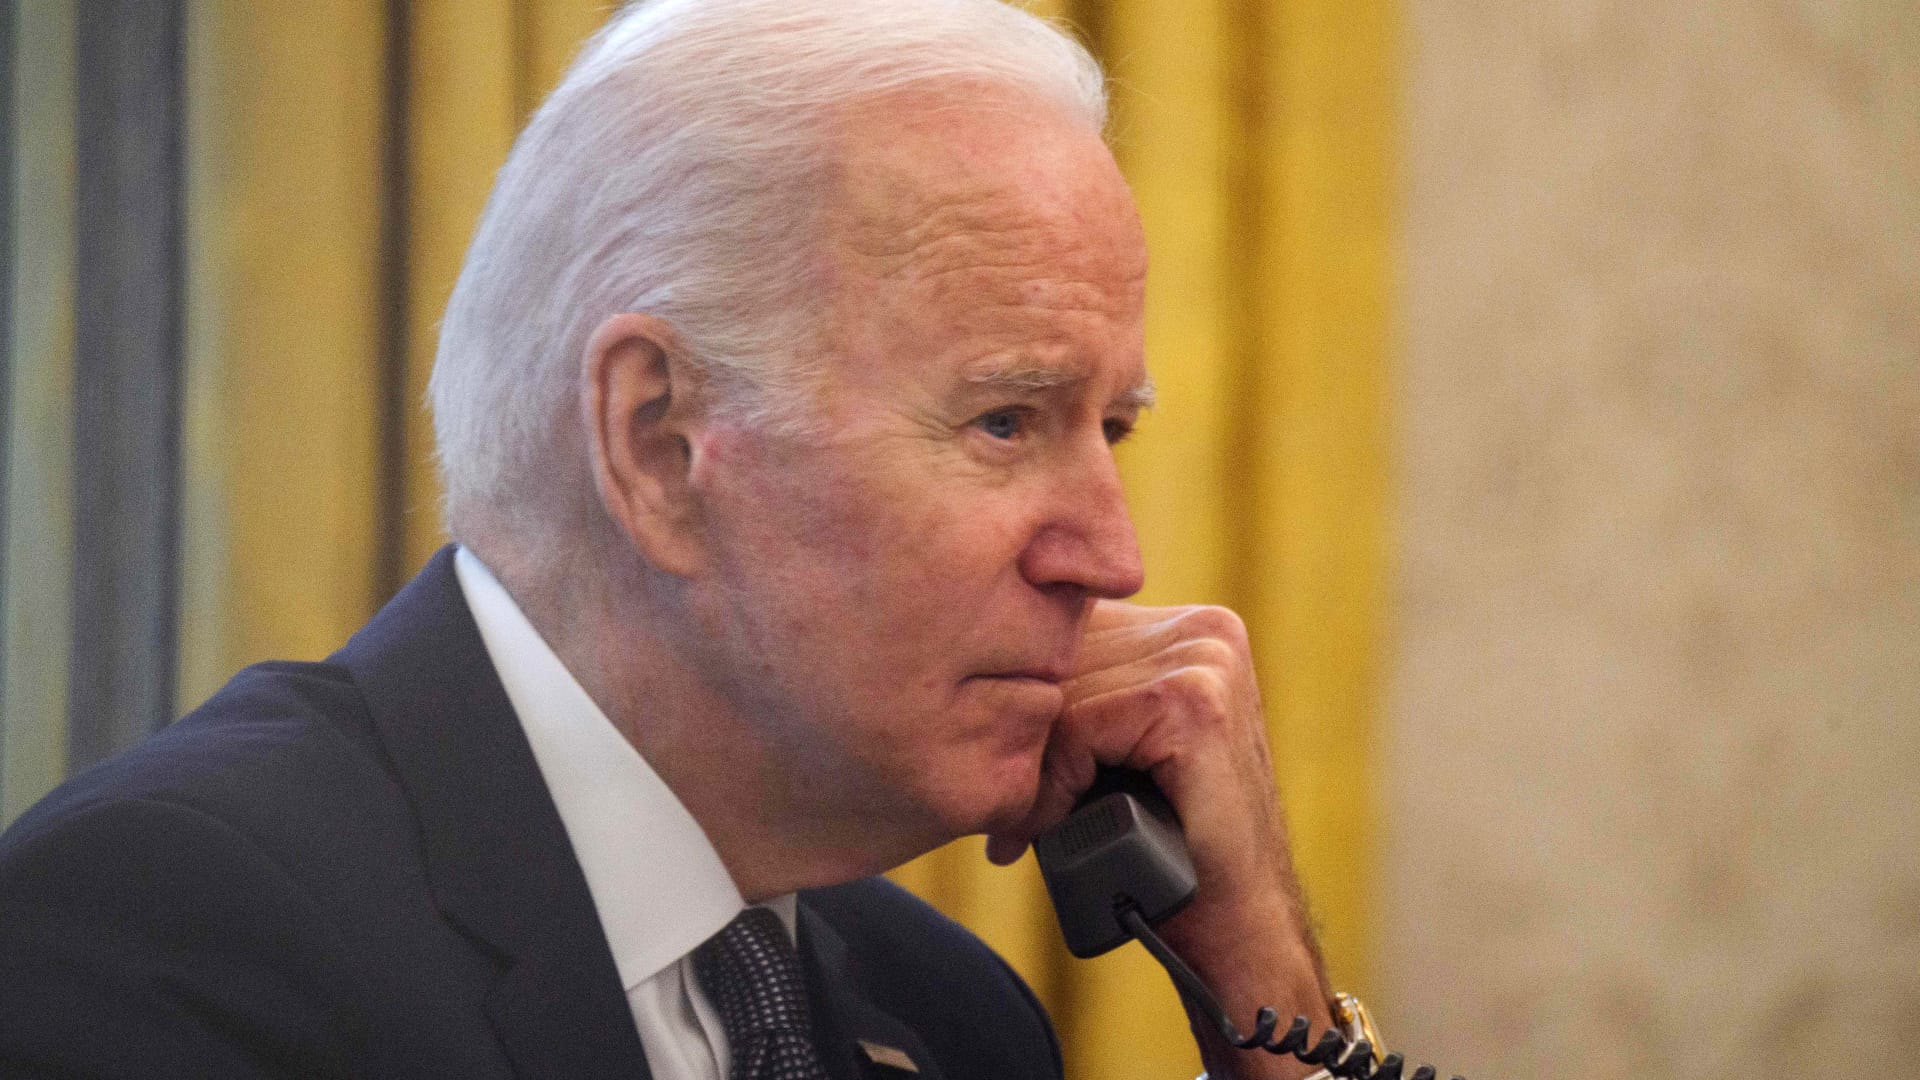 US President Joe Biden speaks on the phone to his Ukrainian counterpart Volodymyr Zelensky in the Oval Office at the White House in Washington, DC, on December 9, 2021.